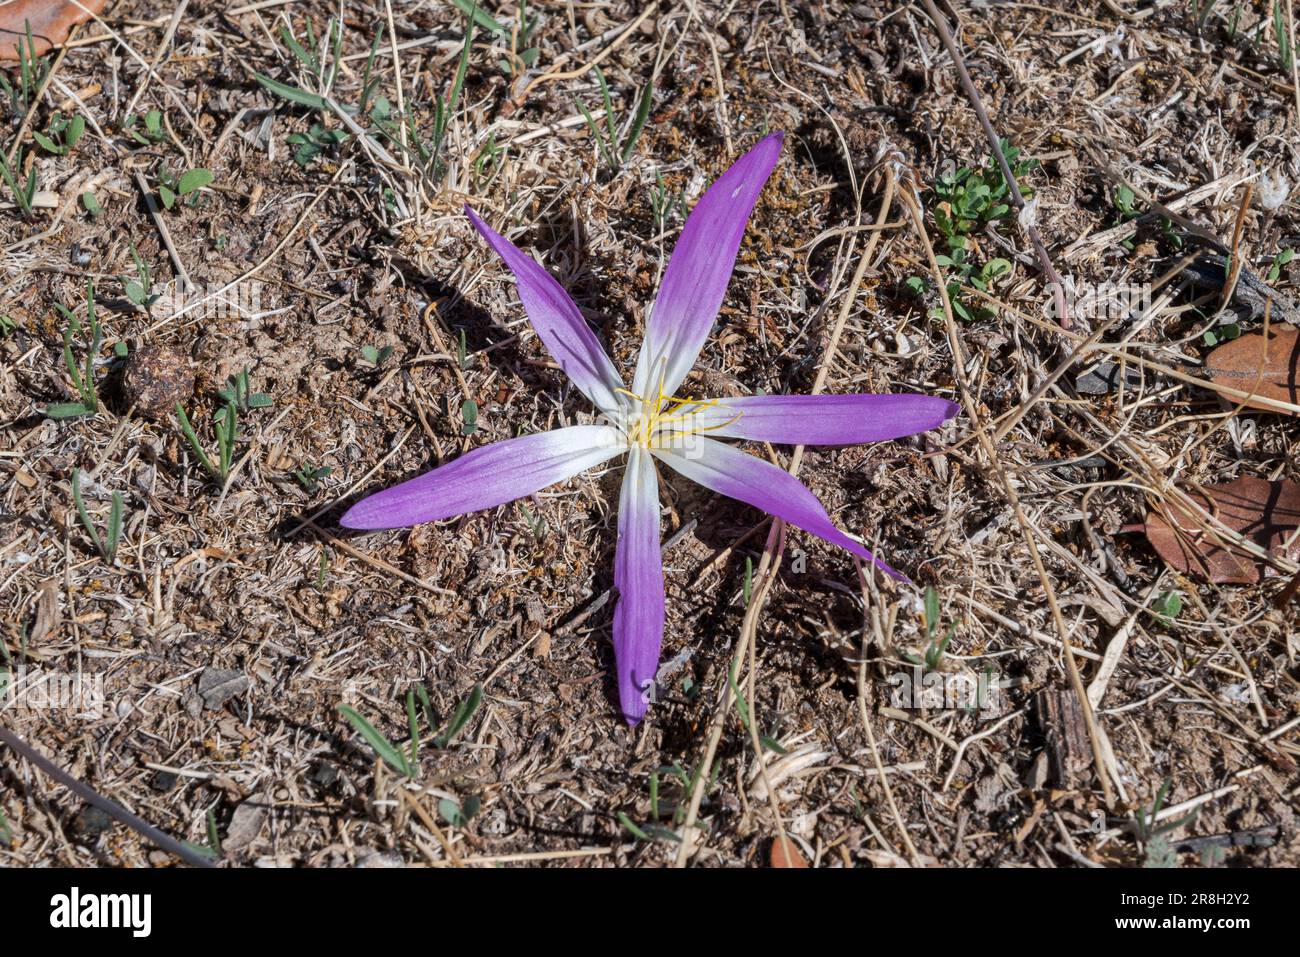 Flower of Mountain Colchicum, Colchicum montanum, a small bulbous plant endemic to the Iberian Peninsula. Photo taken in the municipality of San Agust Stock Photo